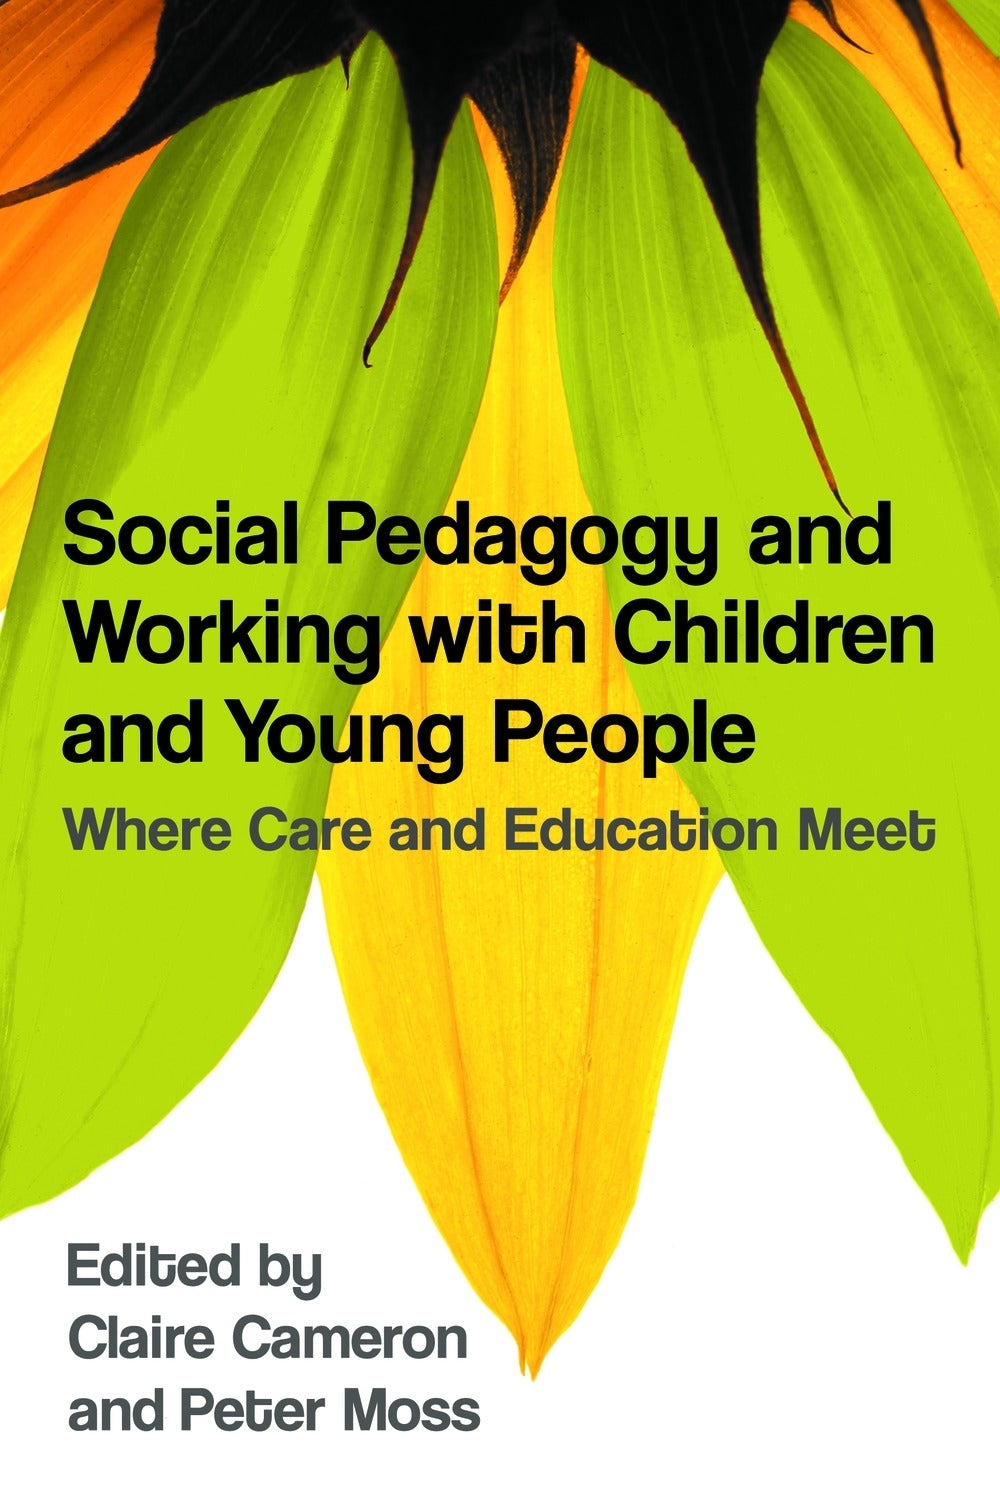 Social Pedagogy and Working with Children and Young People by Claire Cameron, Peter Moss, No Author Listed